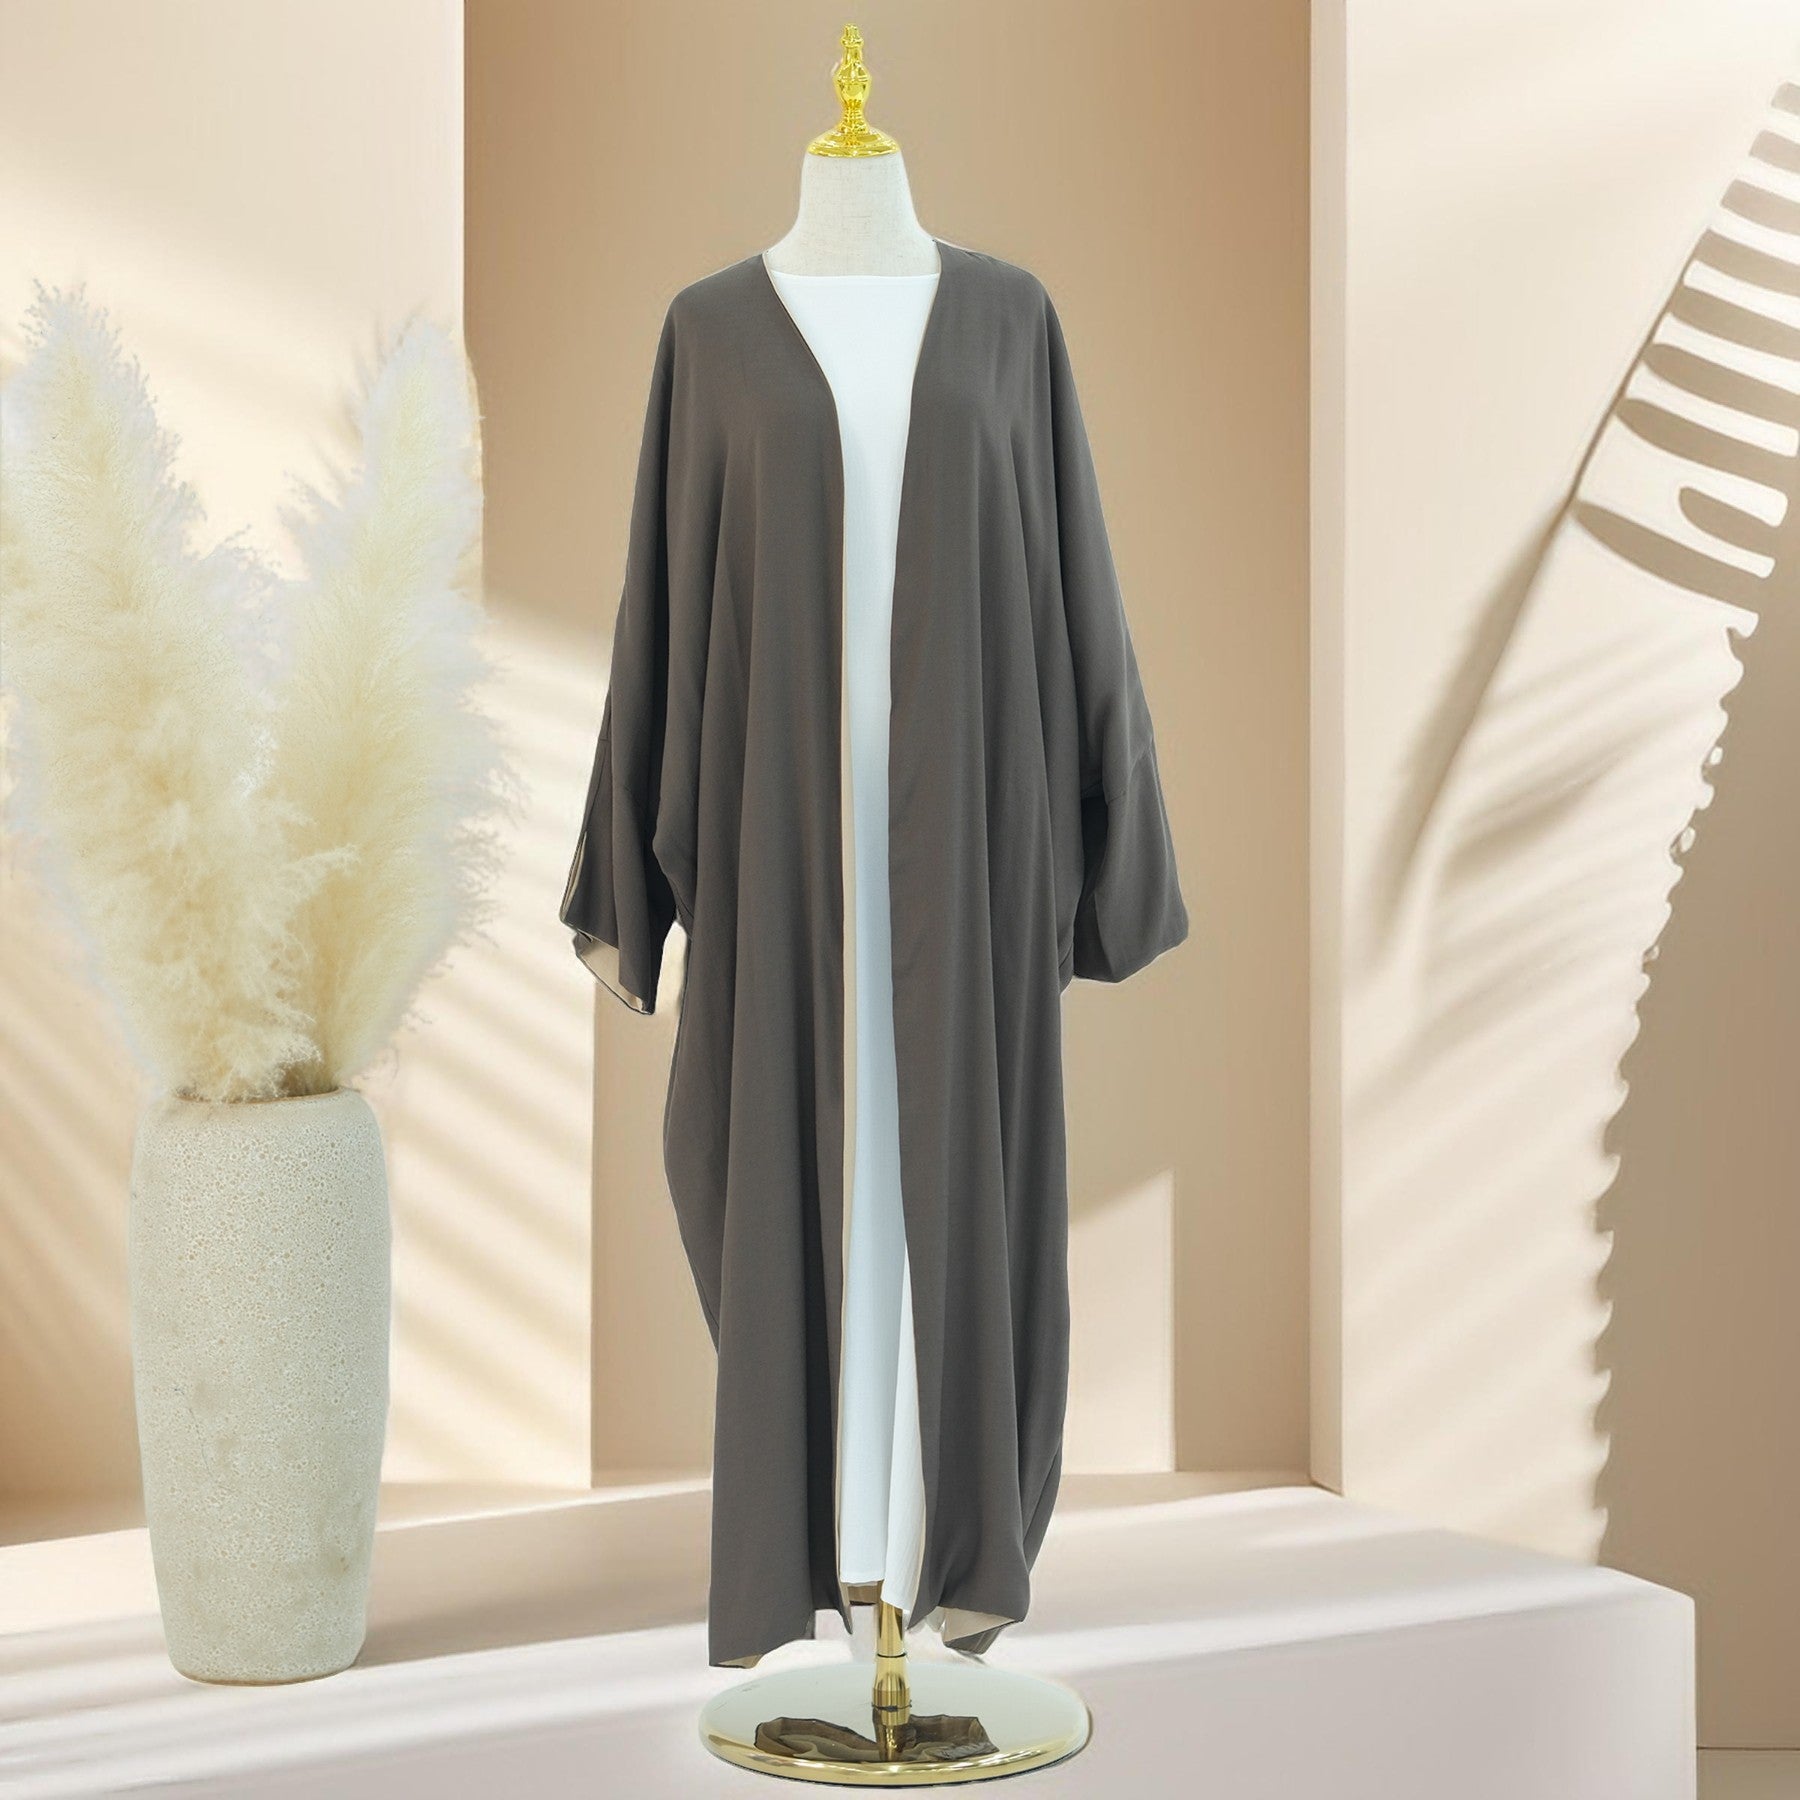 Reversible Double-Sided Kimono Abaya with Split Sleeves - Try Modest Limited 